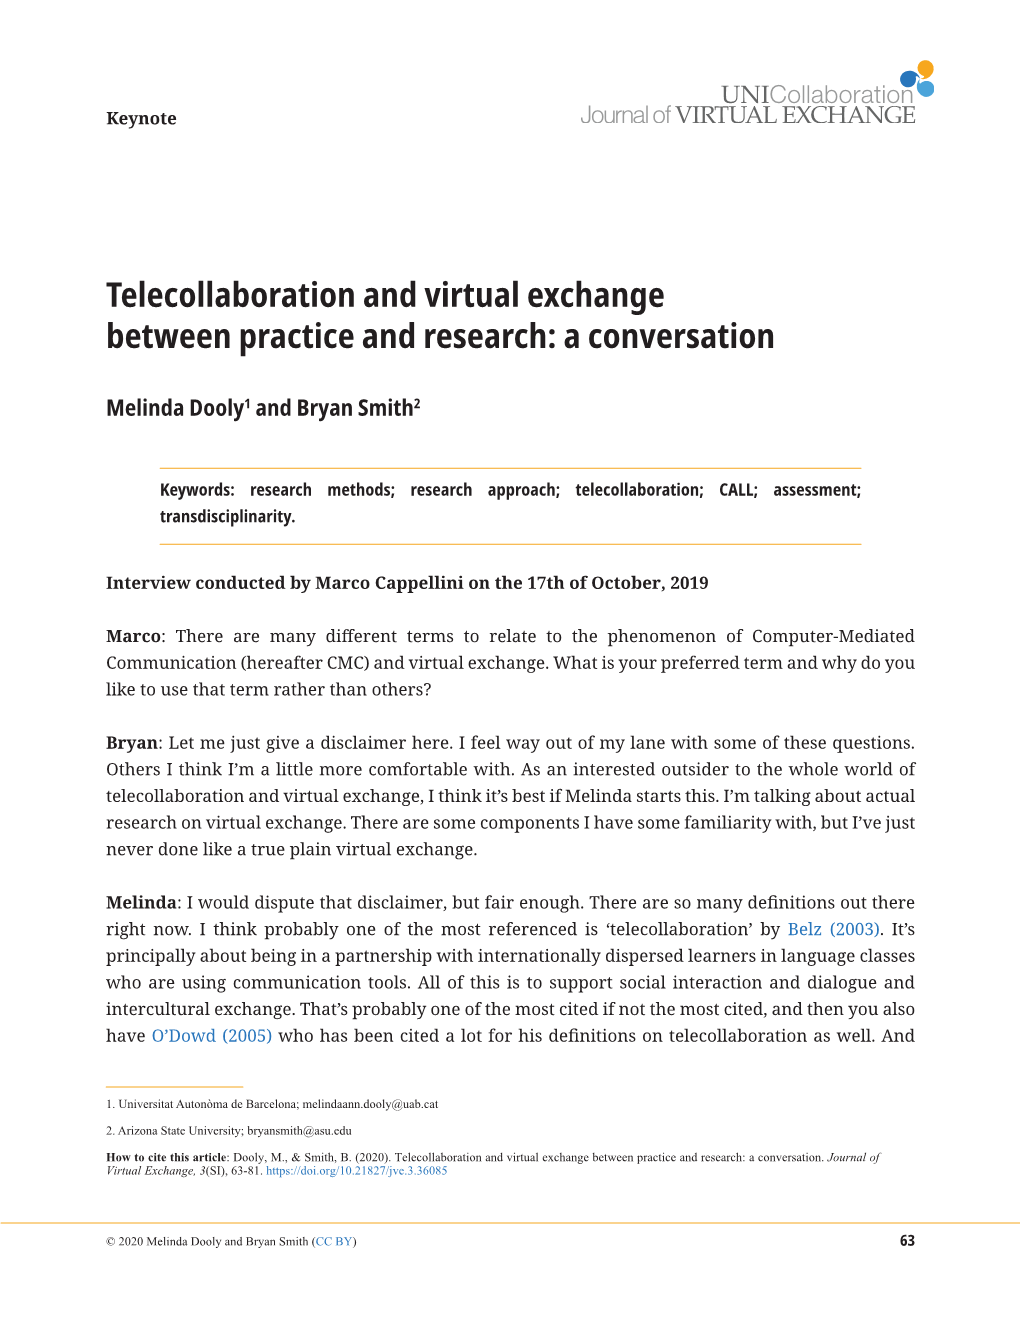 Telecollaboration and Virtual Exchange Between Practice and Research: a Conversation